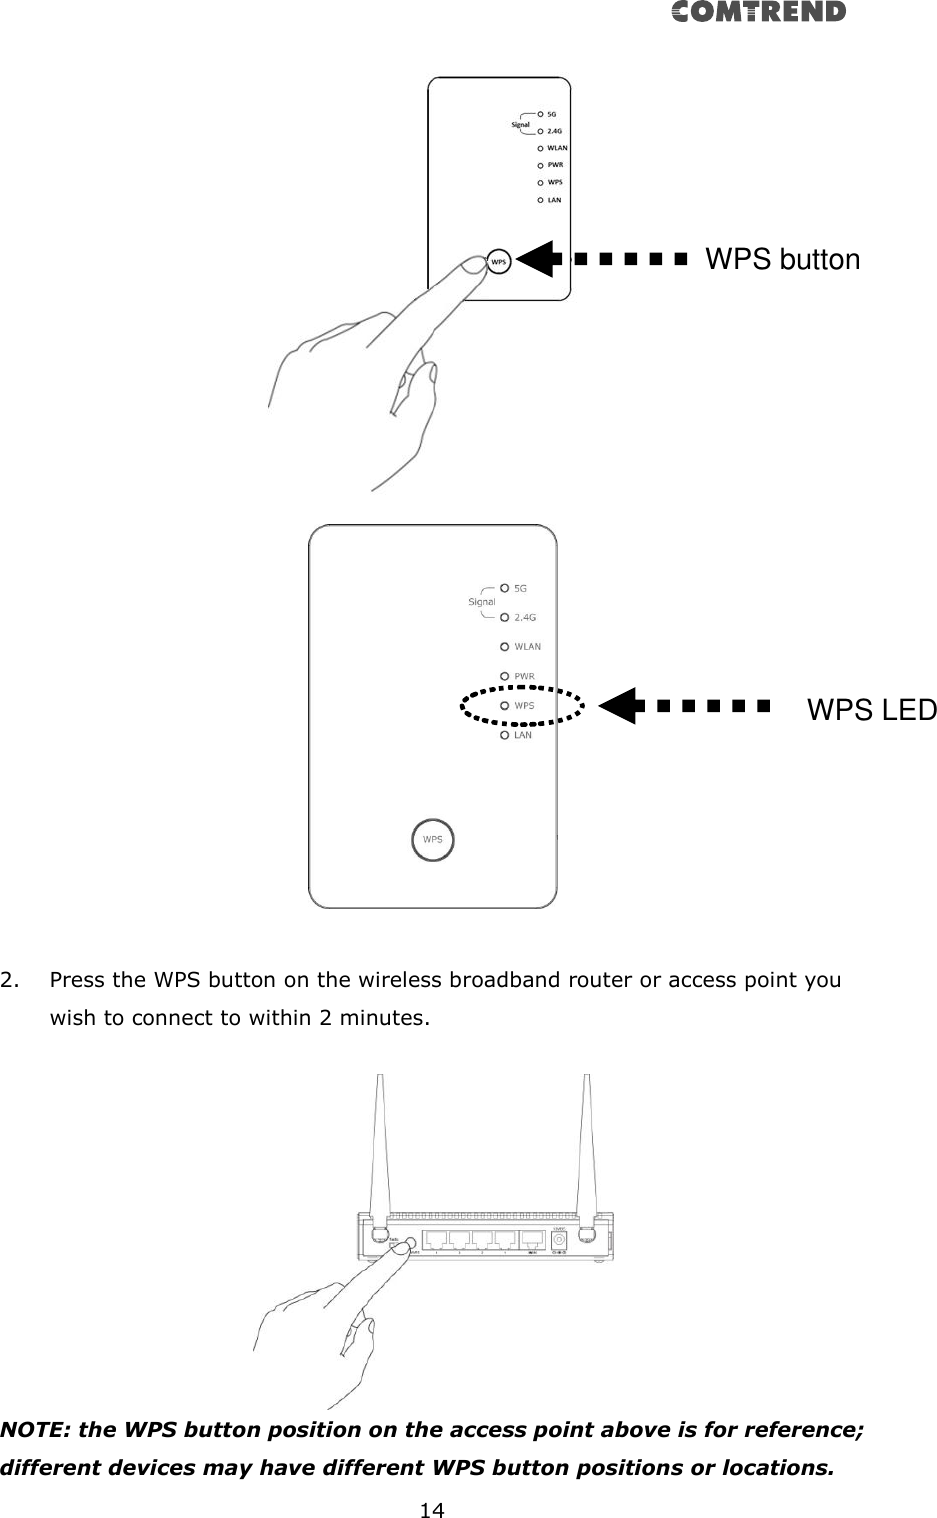       14     2. Press the WPS button on the wireless broadband router or access point you wish to connect to within 2 minutes.   NOTE: the WPS button position on the access point above is for reference; different devices may have different WPS button positions or locations. WPS LED WPS button 